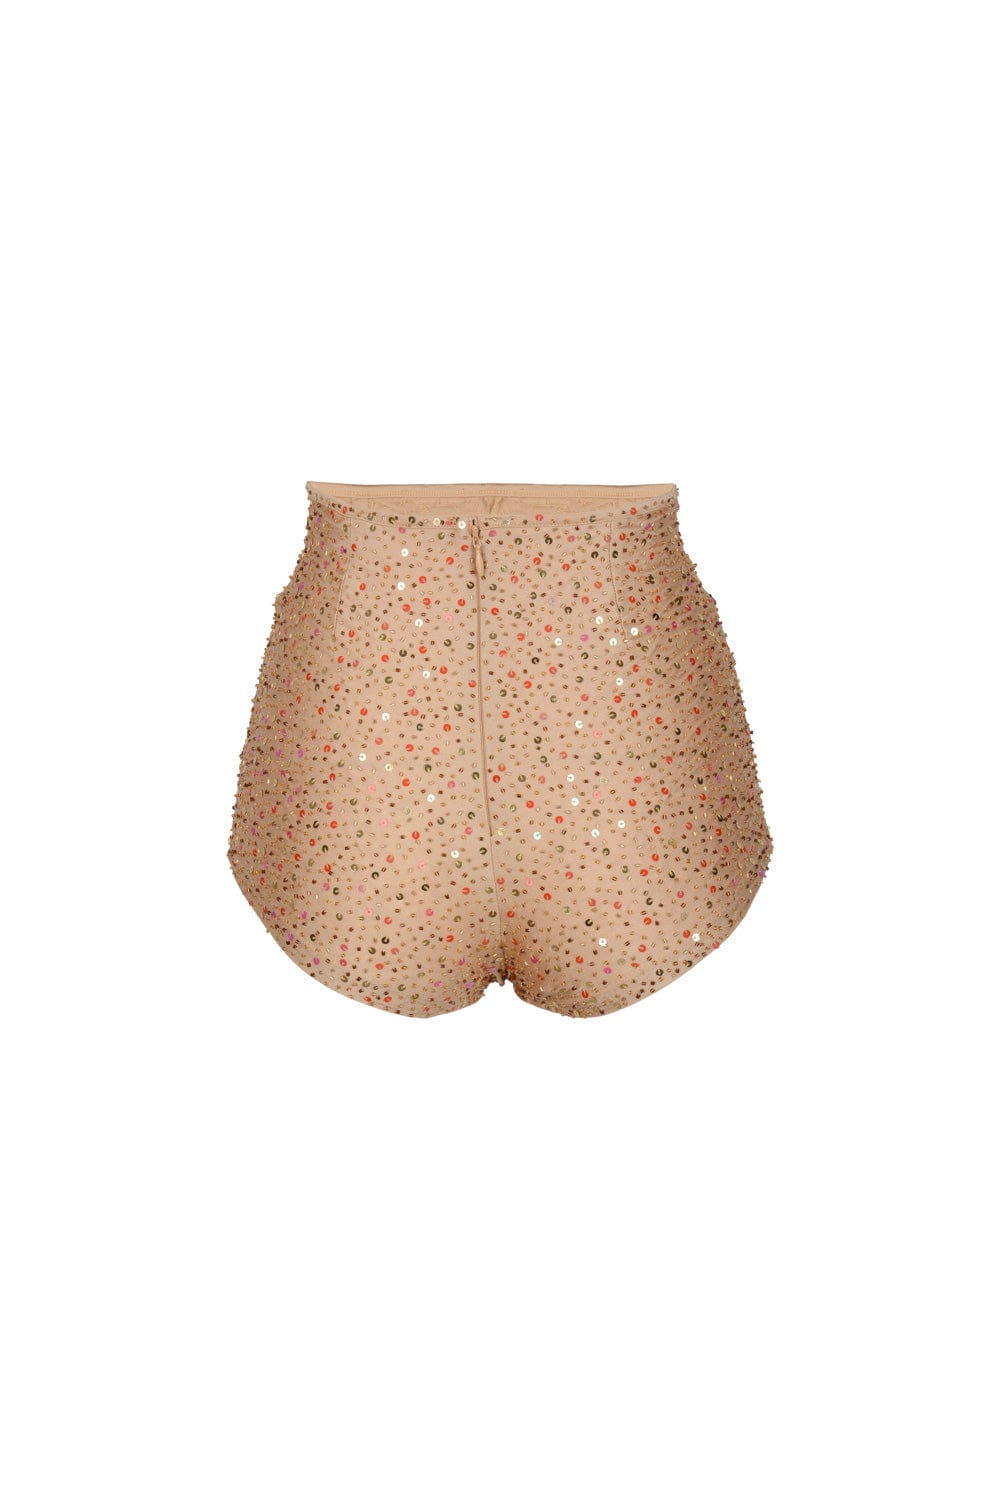 AMETHYST BEADED SPARKLE SHORTS - GOLD - Her Pony